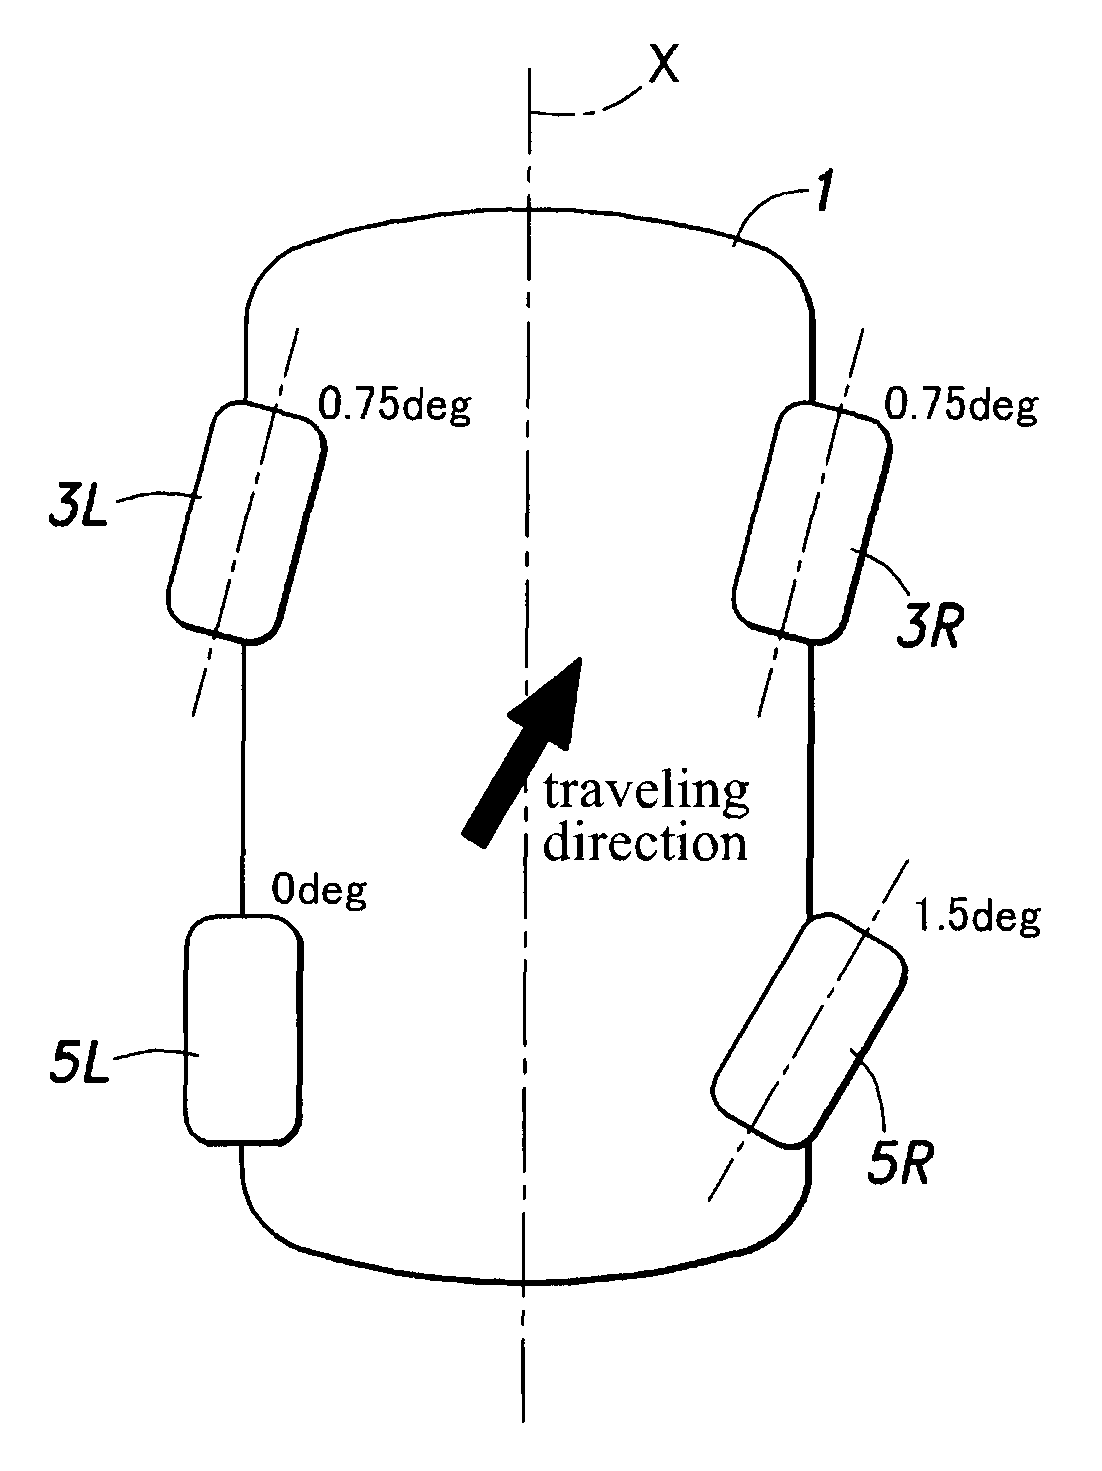 Vehicle with a variable rear toe angle